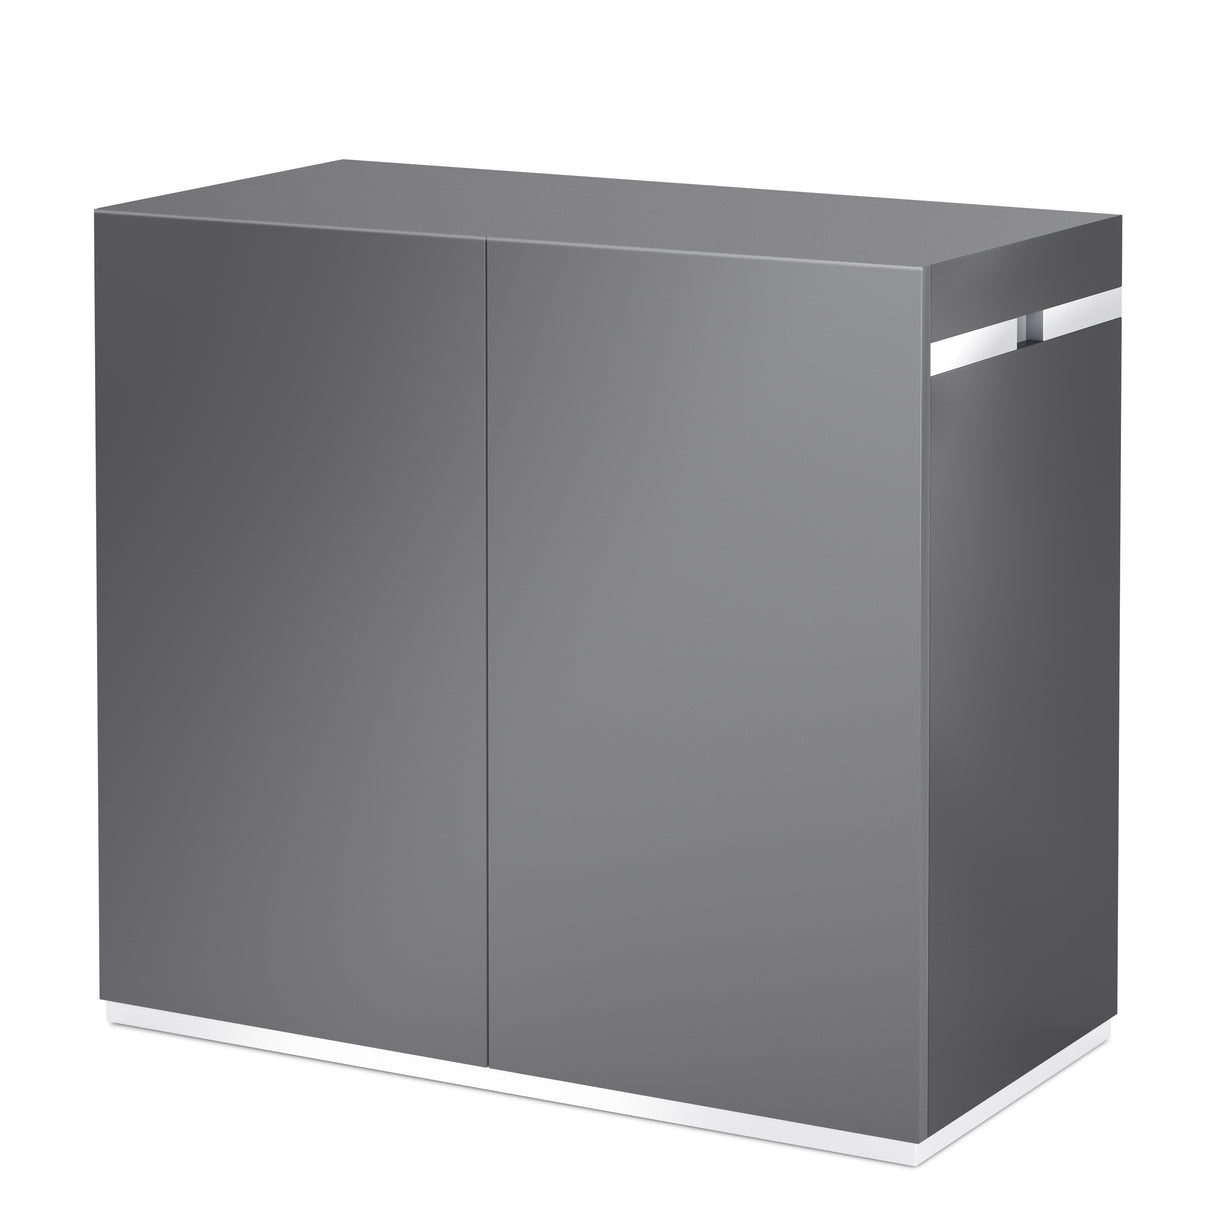 OASE ScaperLine 90 Cabinet available in Grey